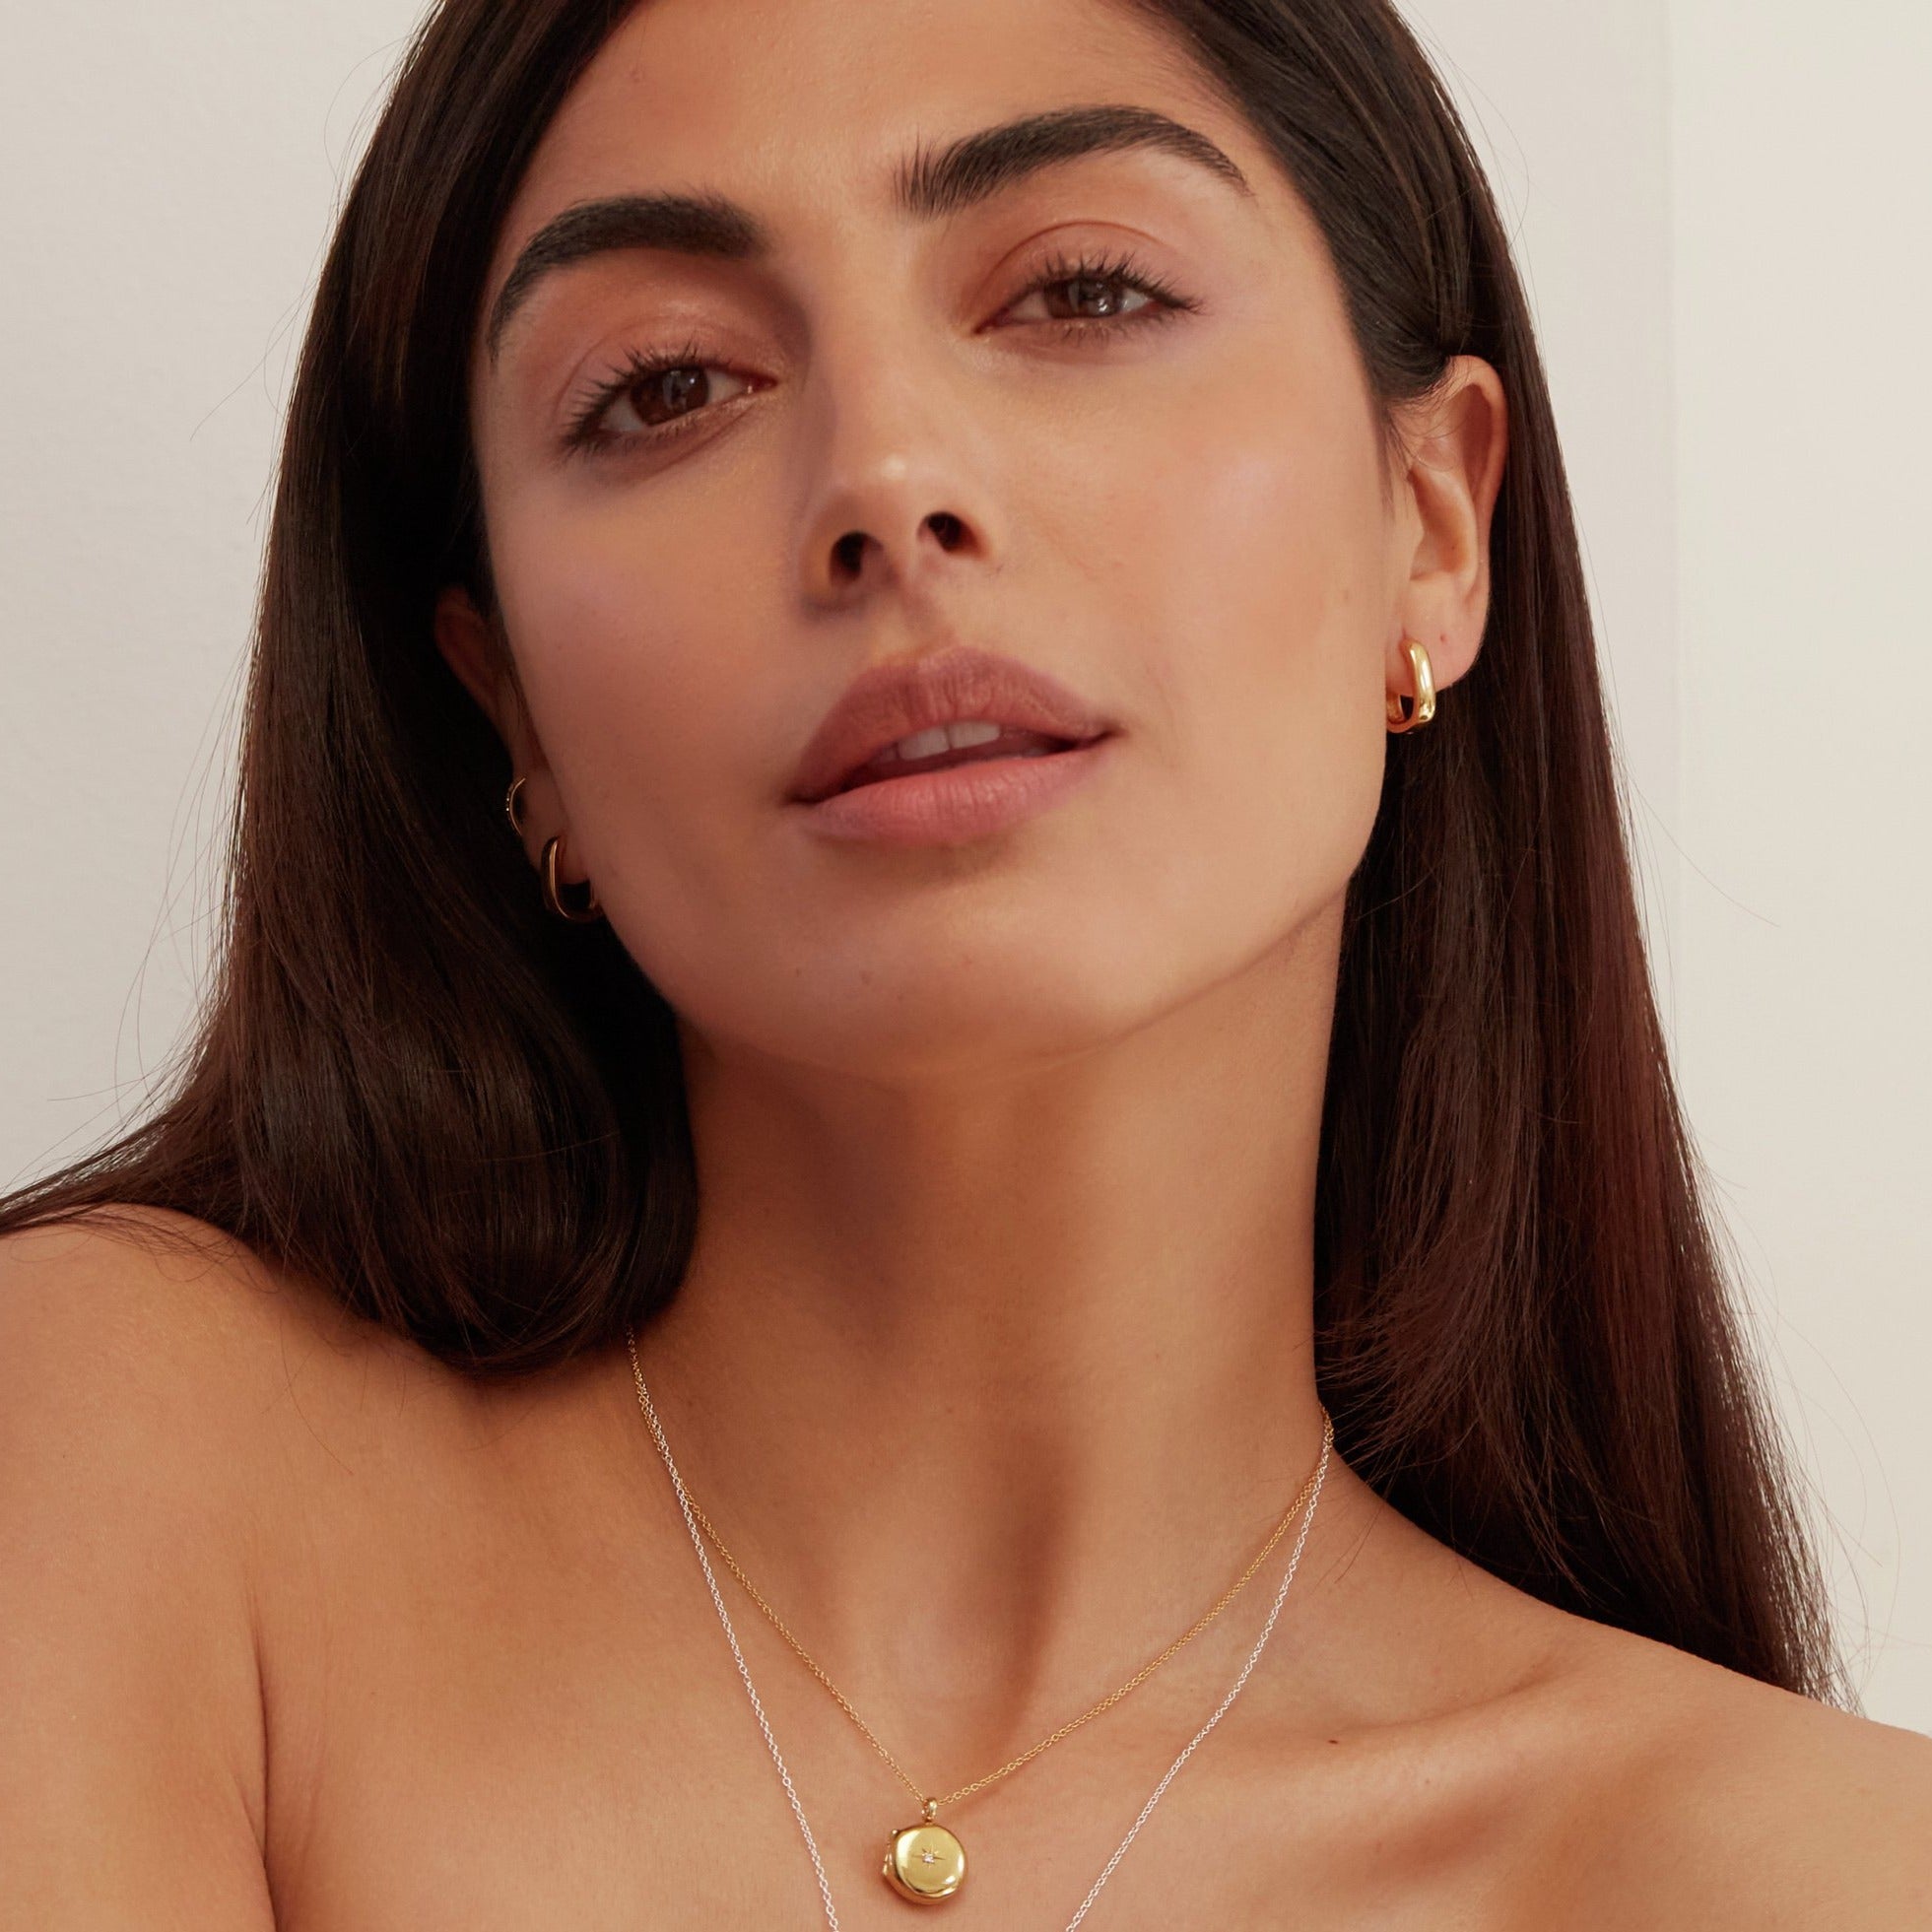 Gold thick squared hoop earrings in the ear lobes of a brunette woman wearing a gold small round diamond locket necklace around her neck